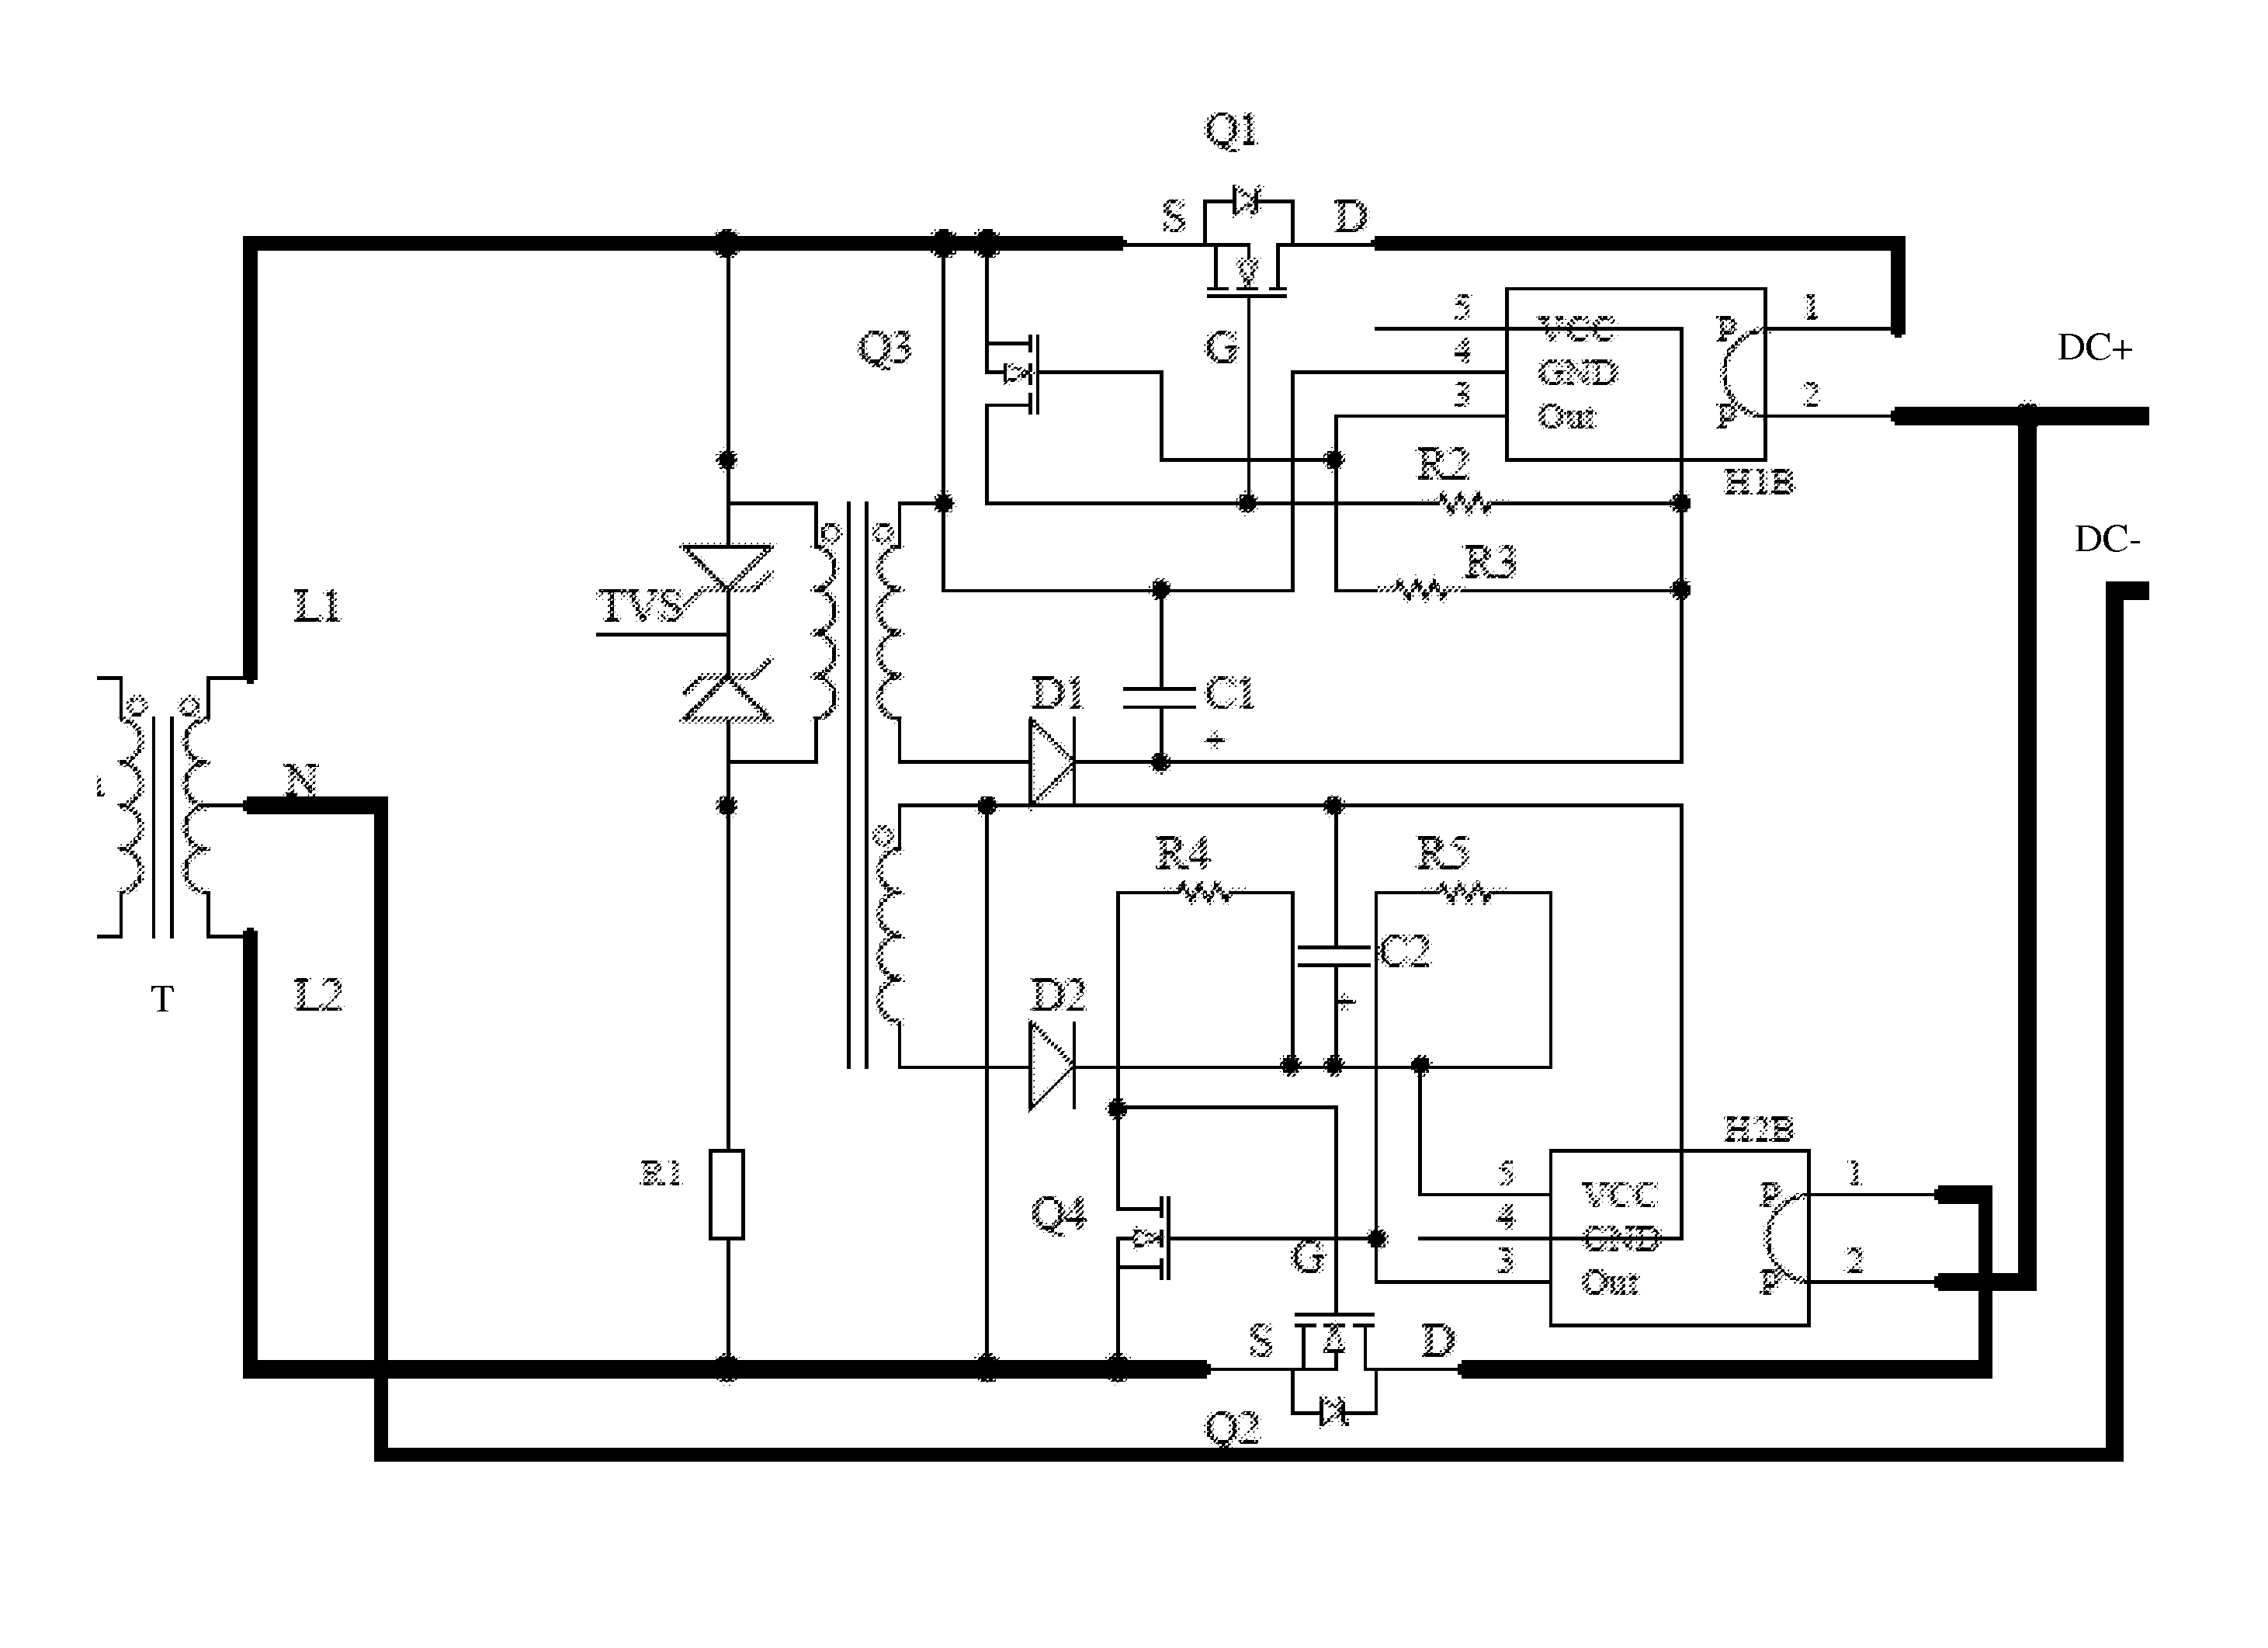 Active switching rectifier employing mosfet and current-based control using a hall-effect switch